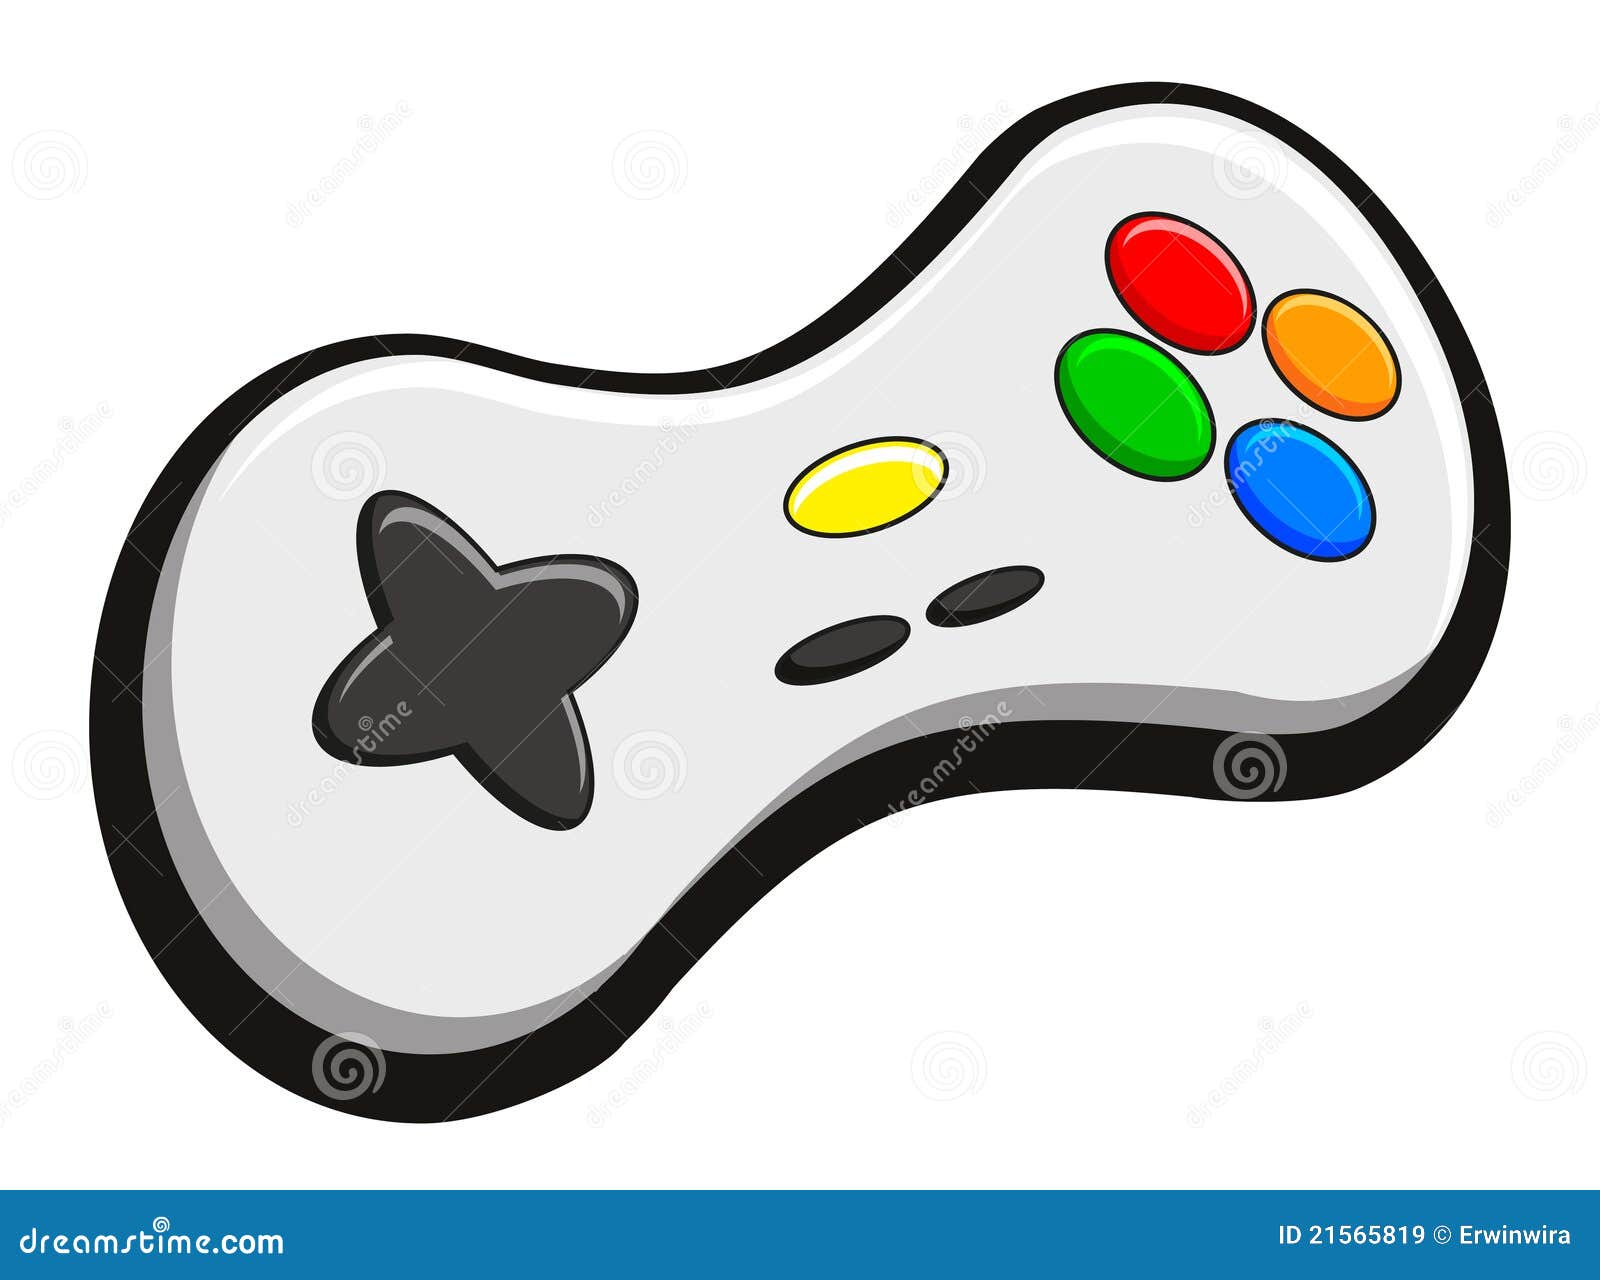 video game clipart - photo #17